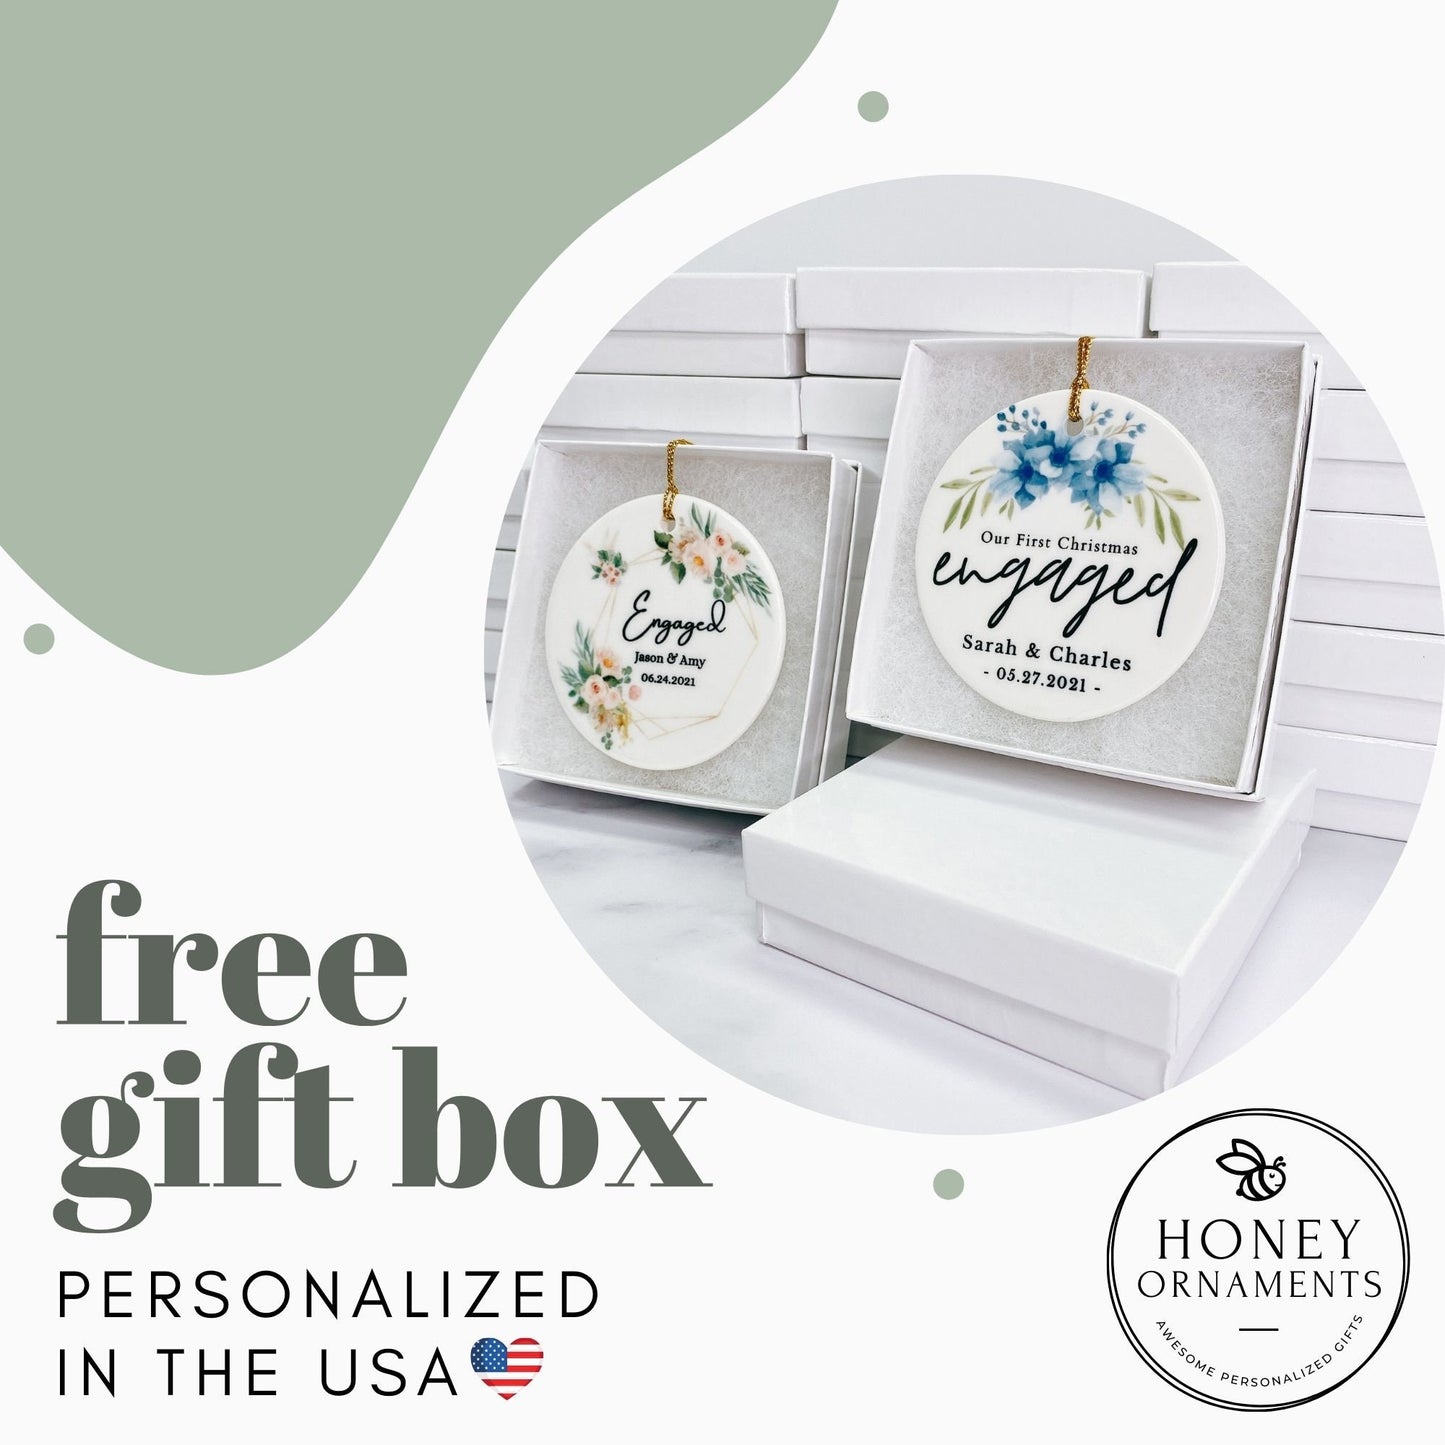 Engaged Ornament, Engagement Ornament, Personalized Keepsake, First Christmas Engaged Ornament, We Are Engaged, Engagement Gift Box